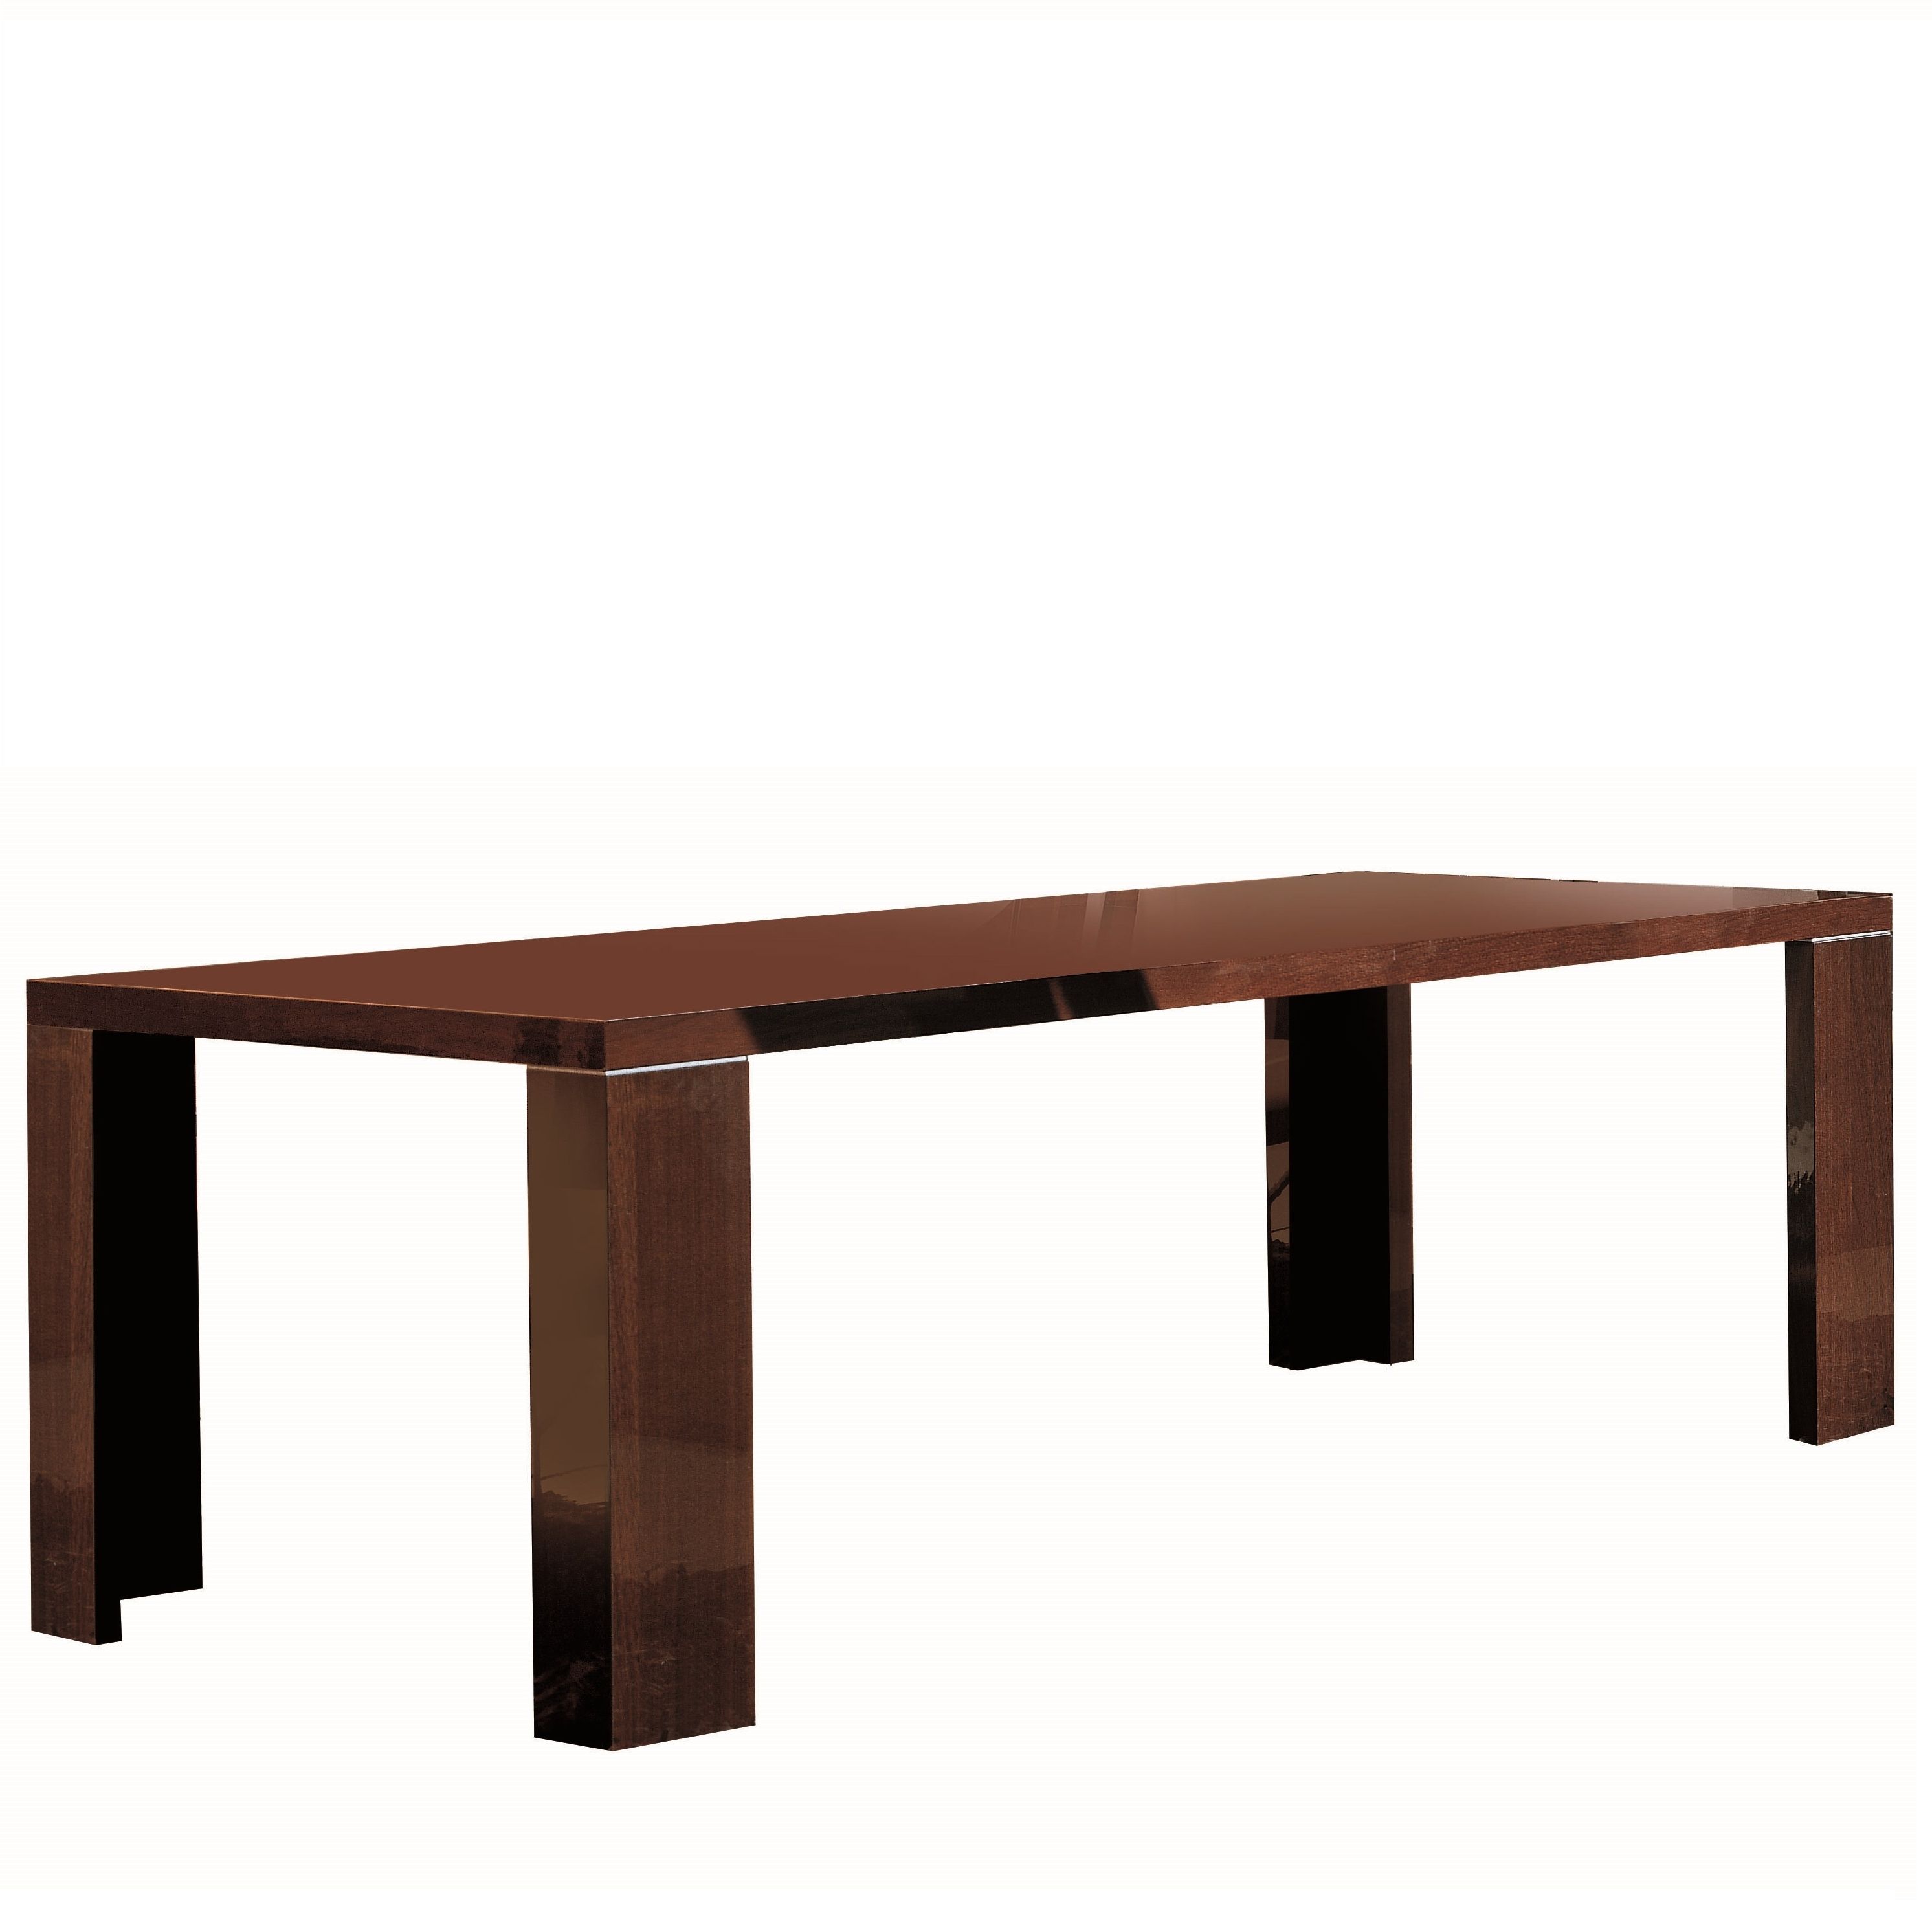 Most Current Pisa Dining Tables Pertaining To Pz Dining Table – House Of Denmark House Of Denmark (View 15 of 25)